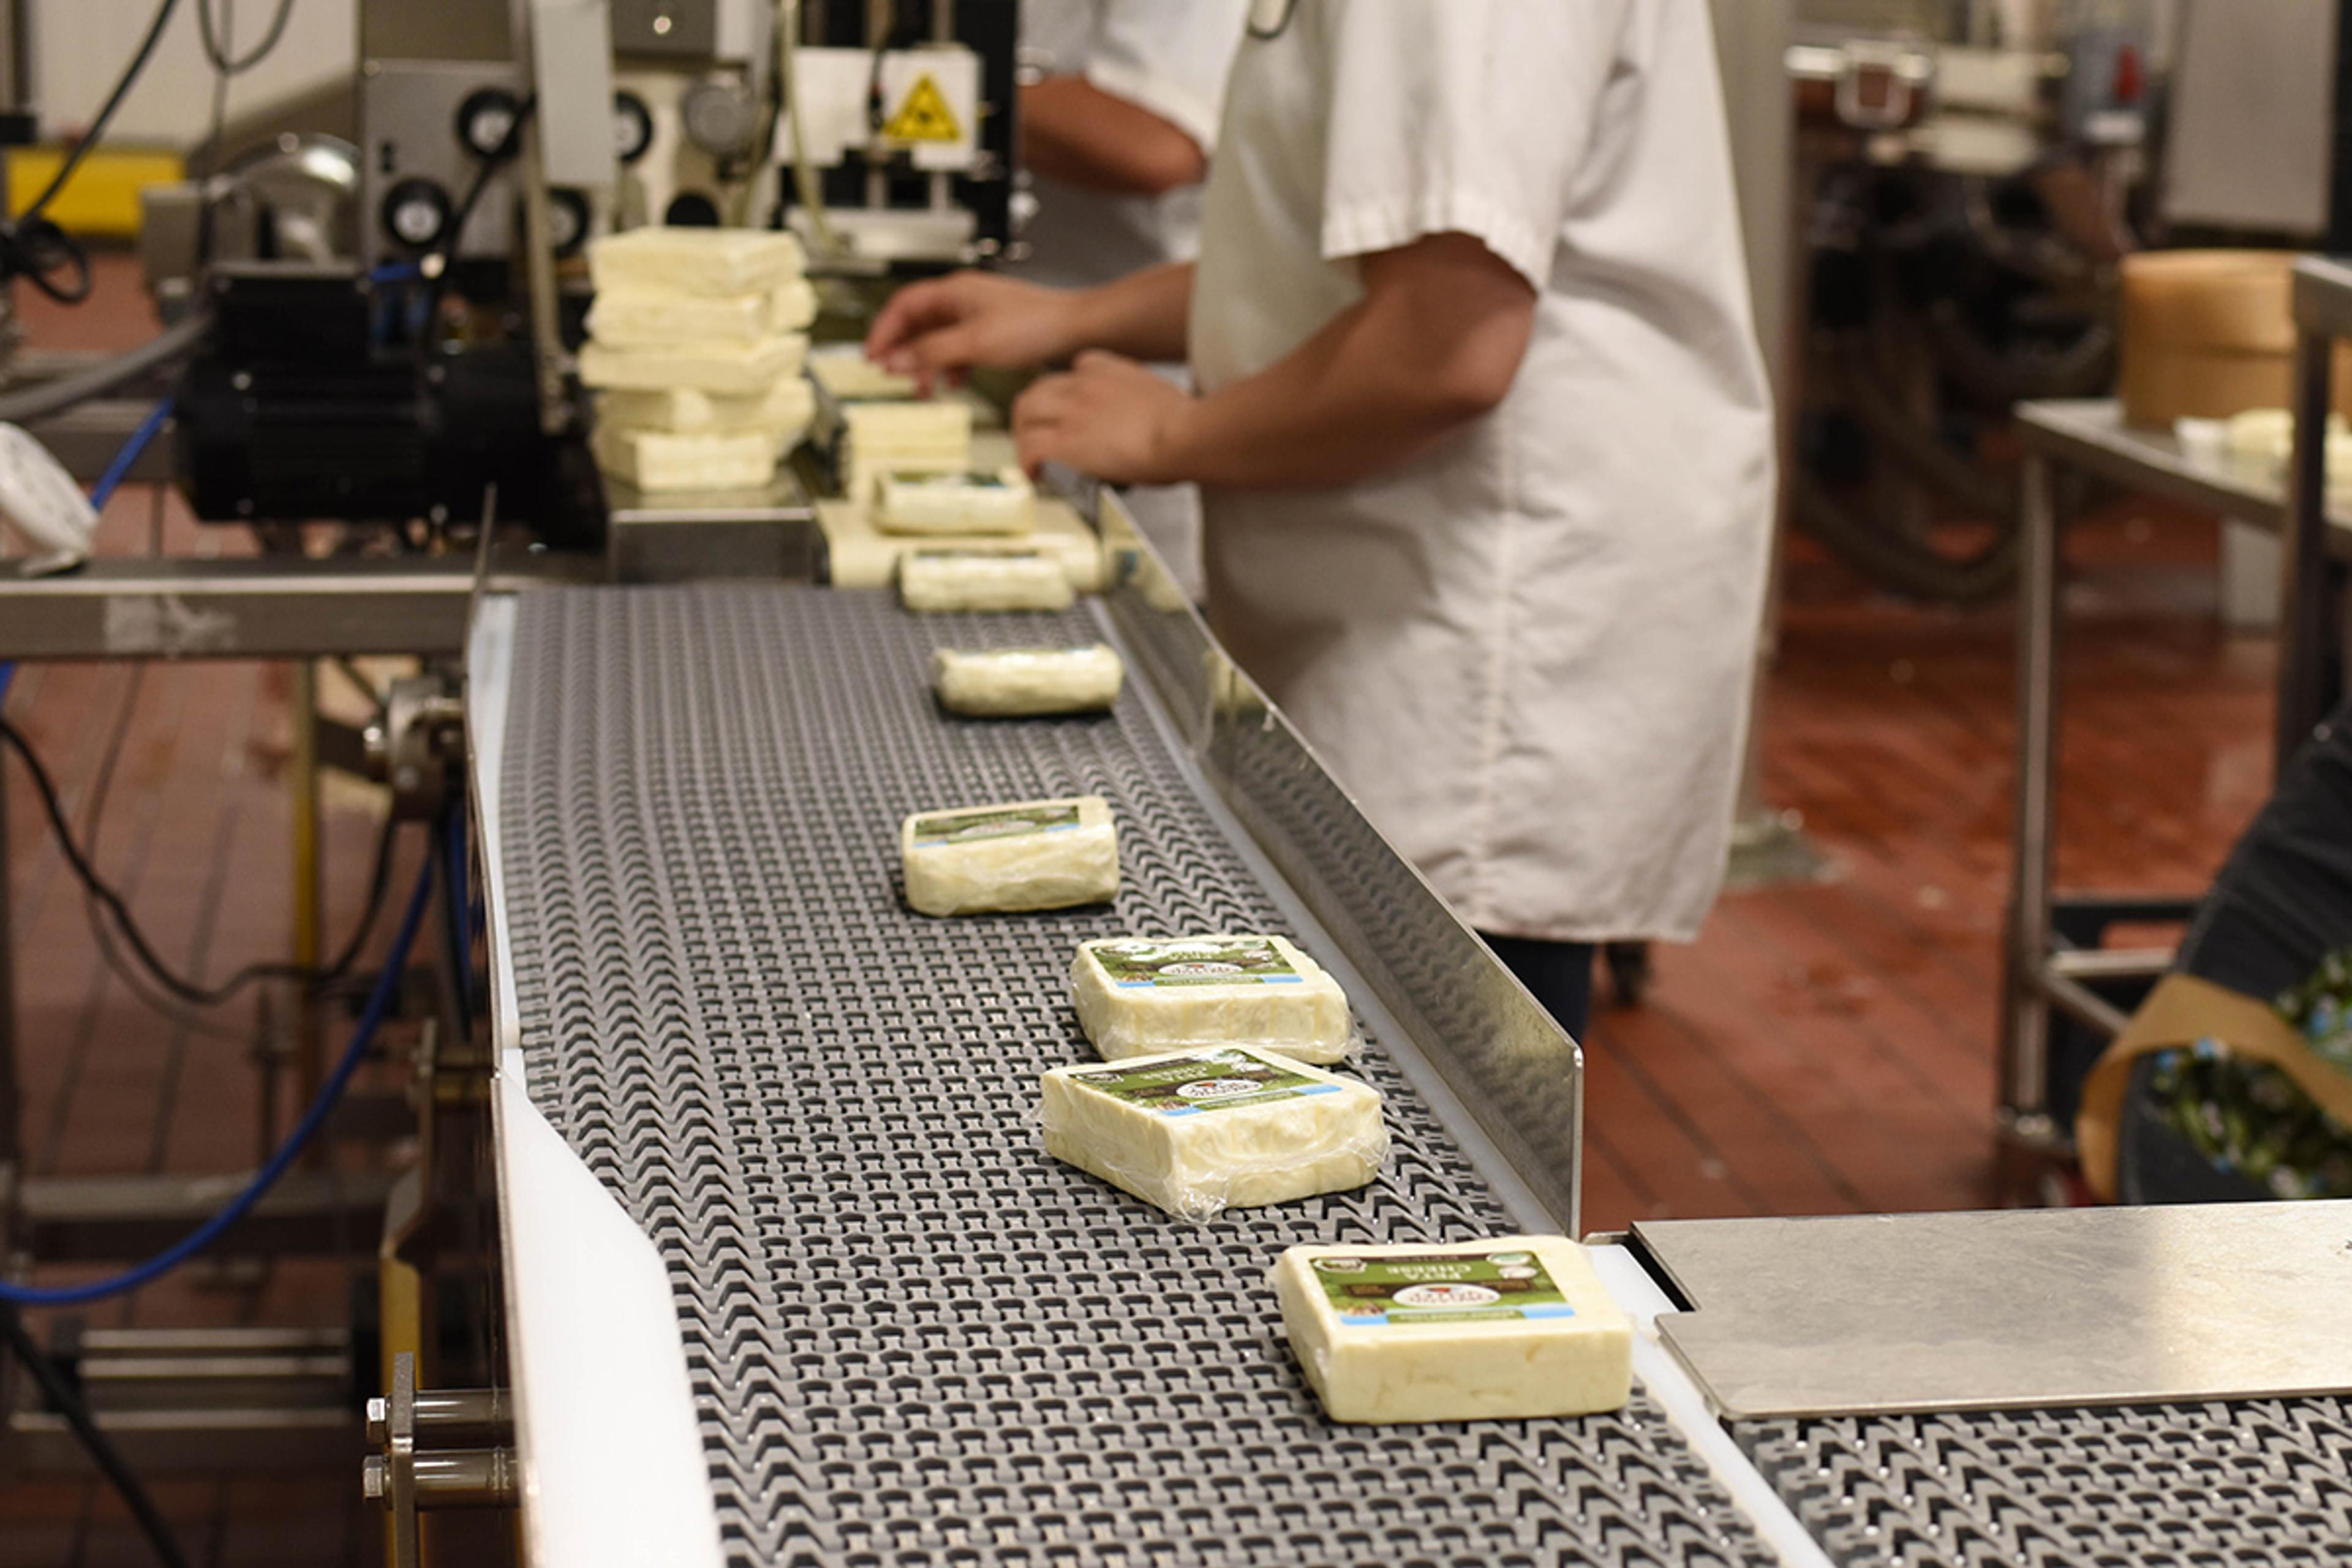 Organic Valley cheese goes through the production line.